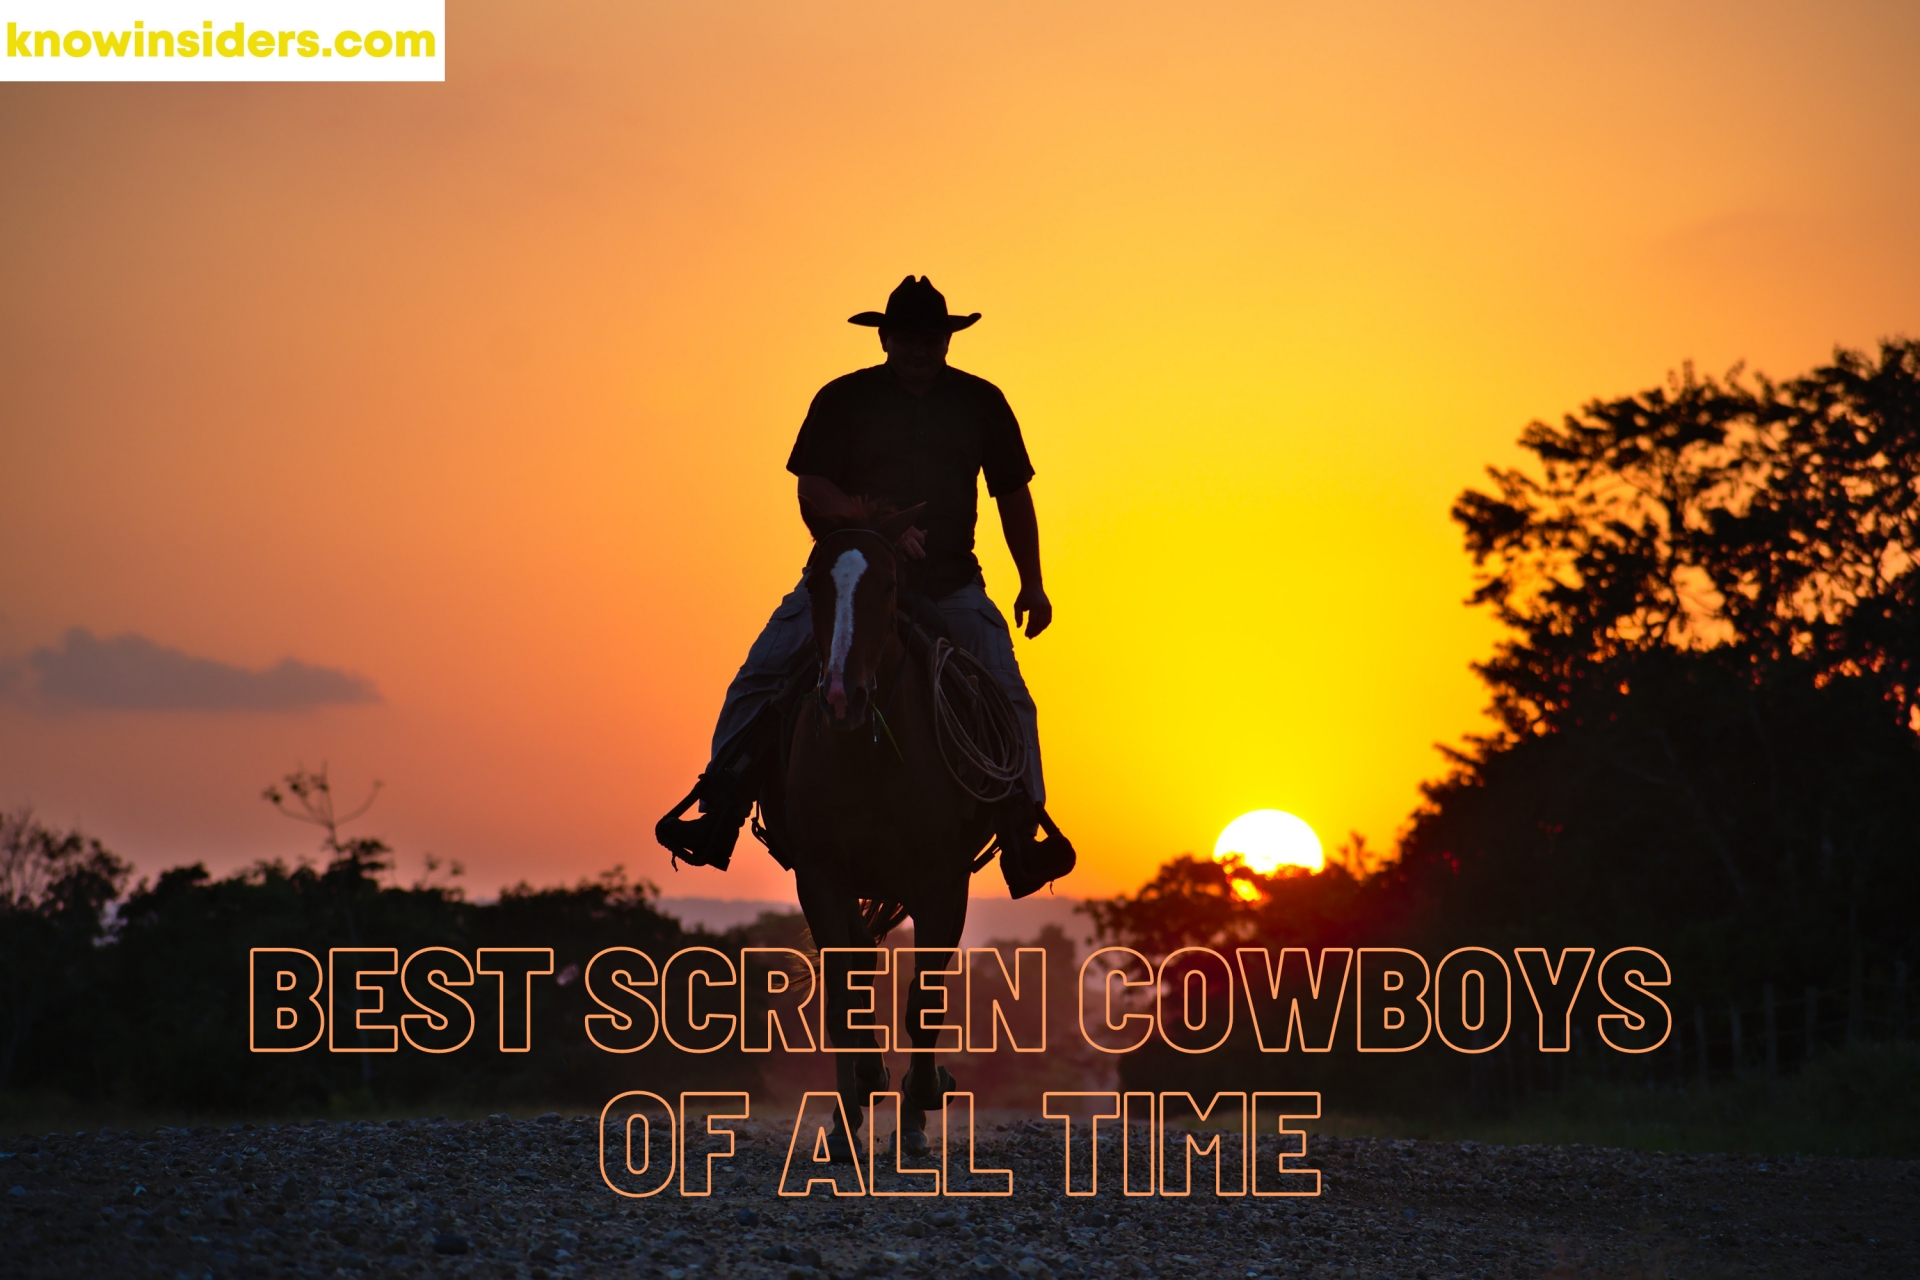 Top 10 Greatest Cowboys In Movie Of All Time